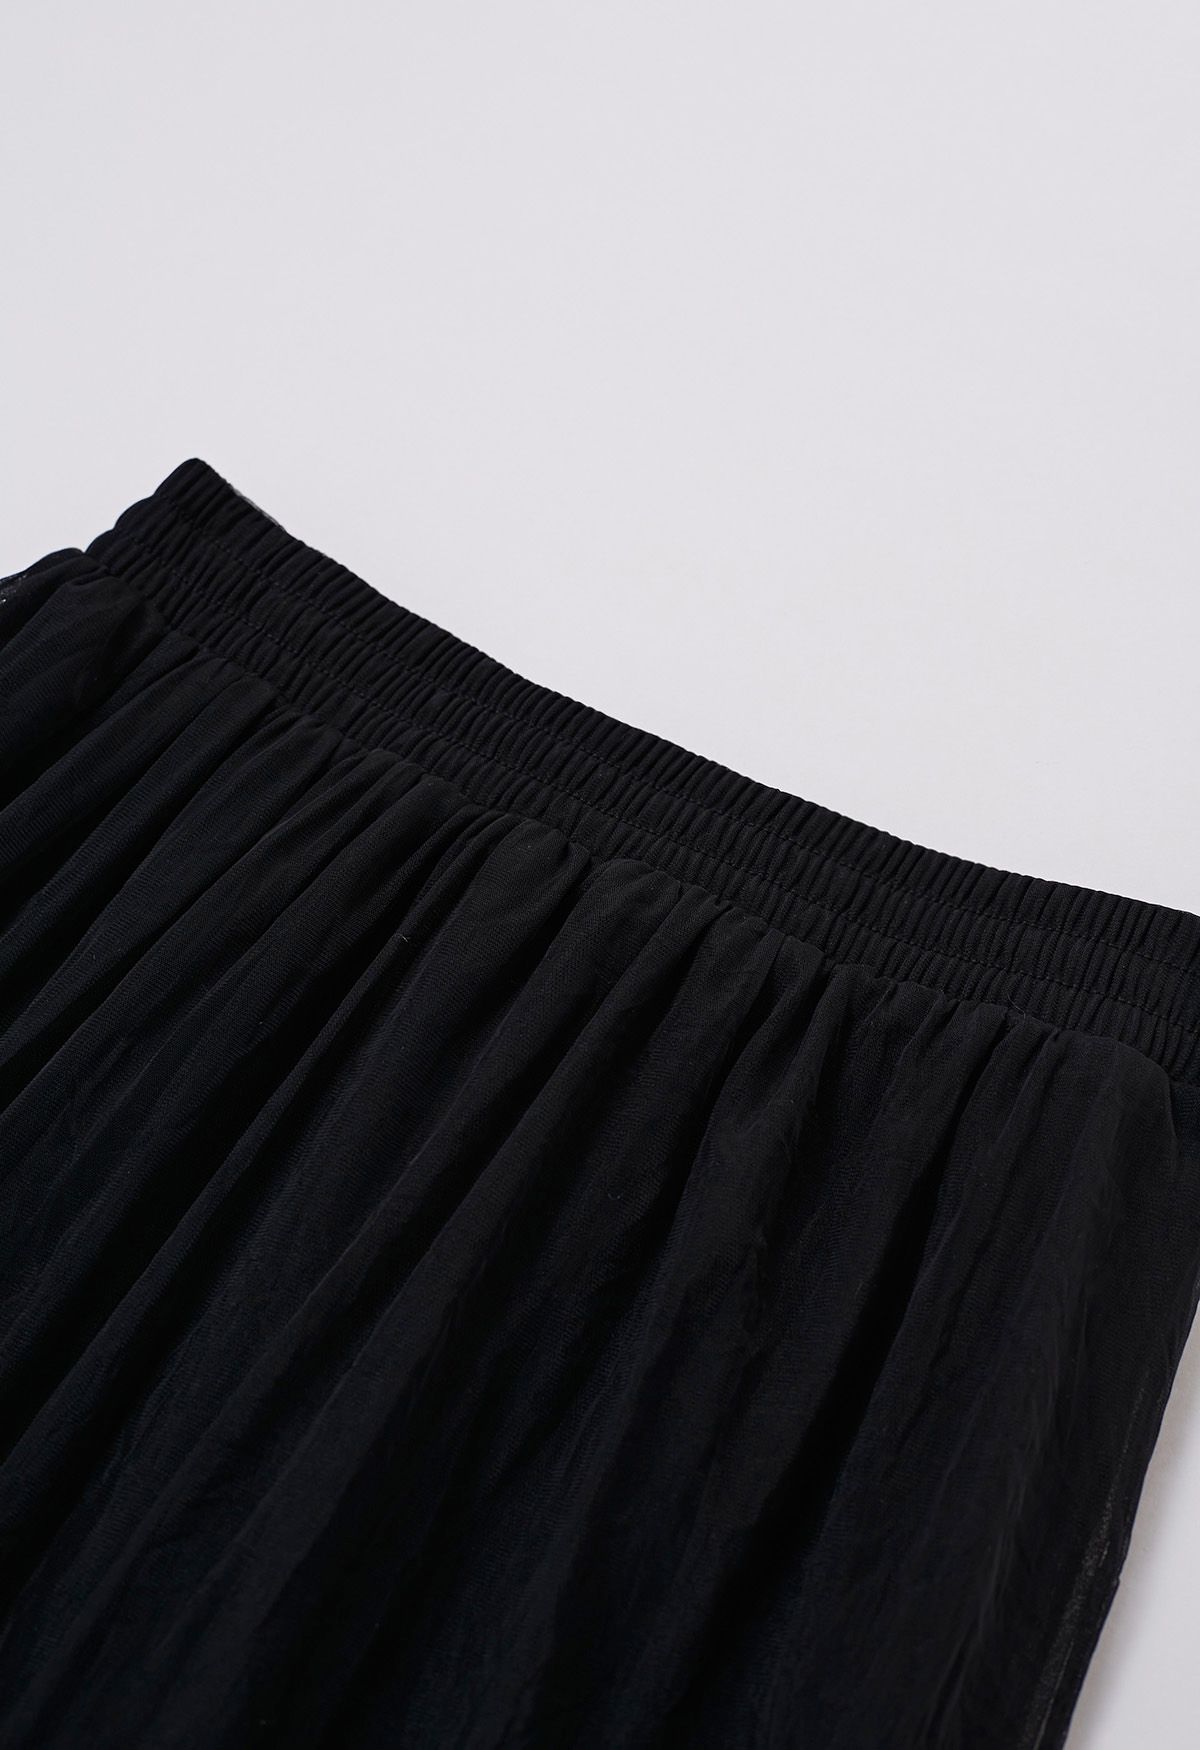 Ruffles Adorned Mesh Tulle Midi Skirt in Black - Retro, Indie and ...